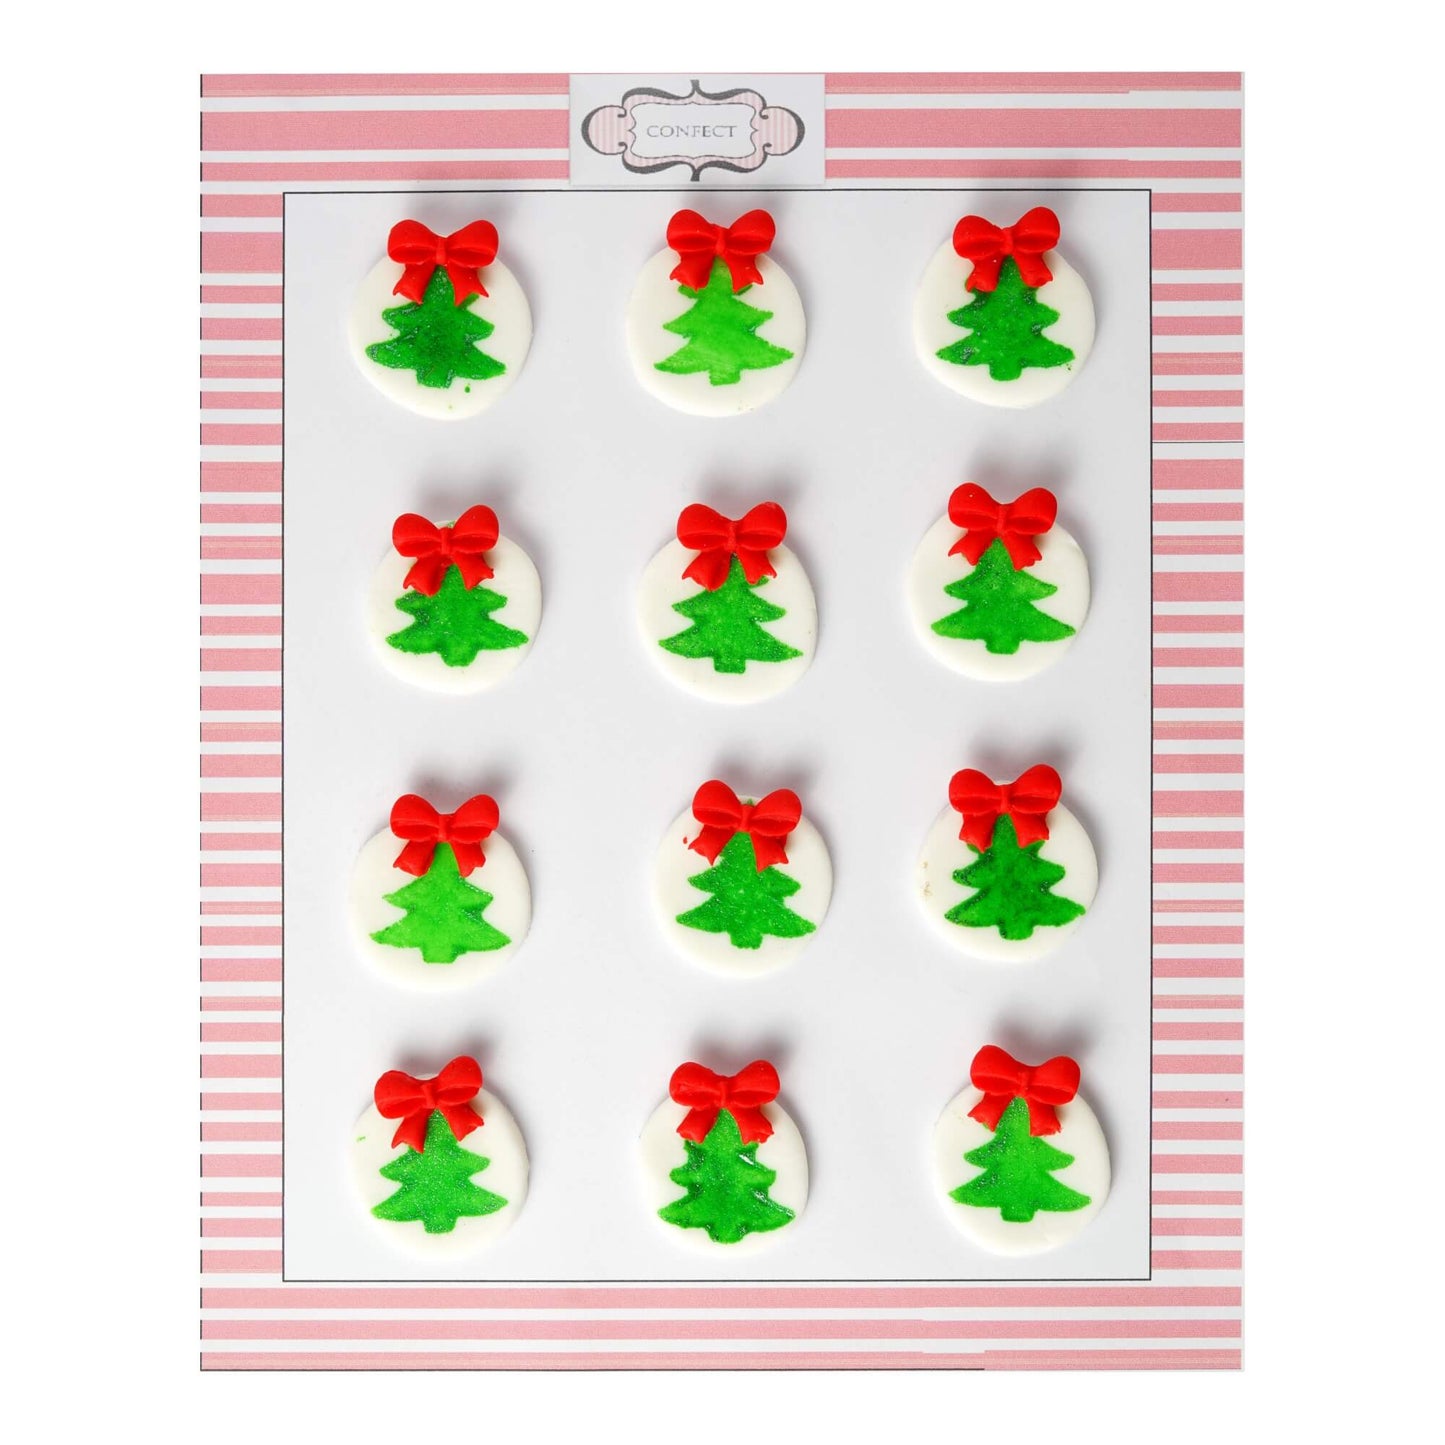 Confect Christmas Tree Green & Red CC 24 60 gms